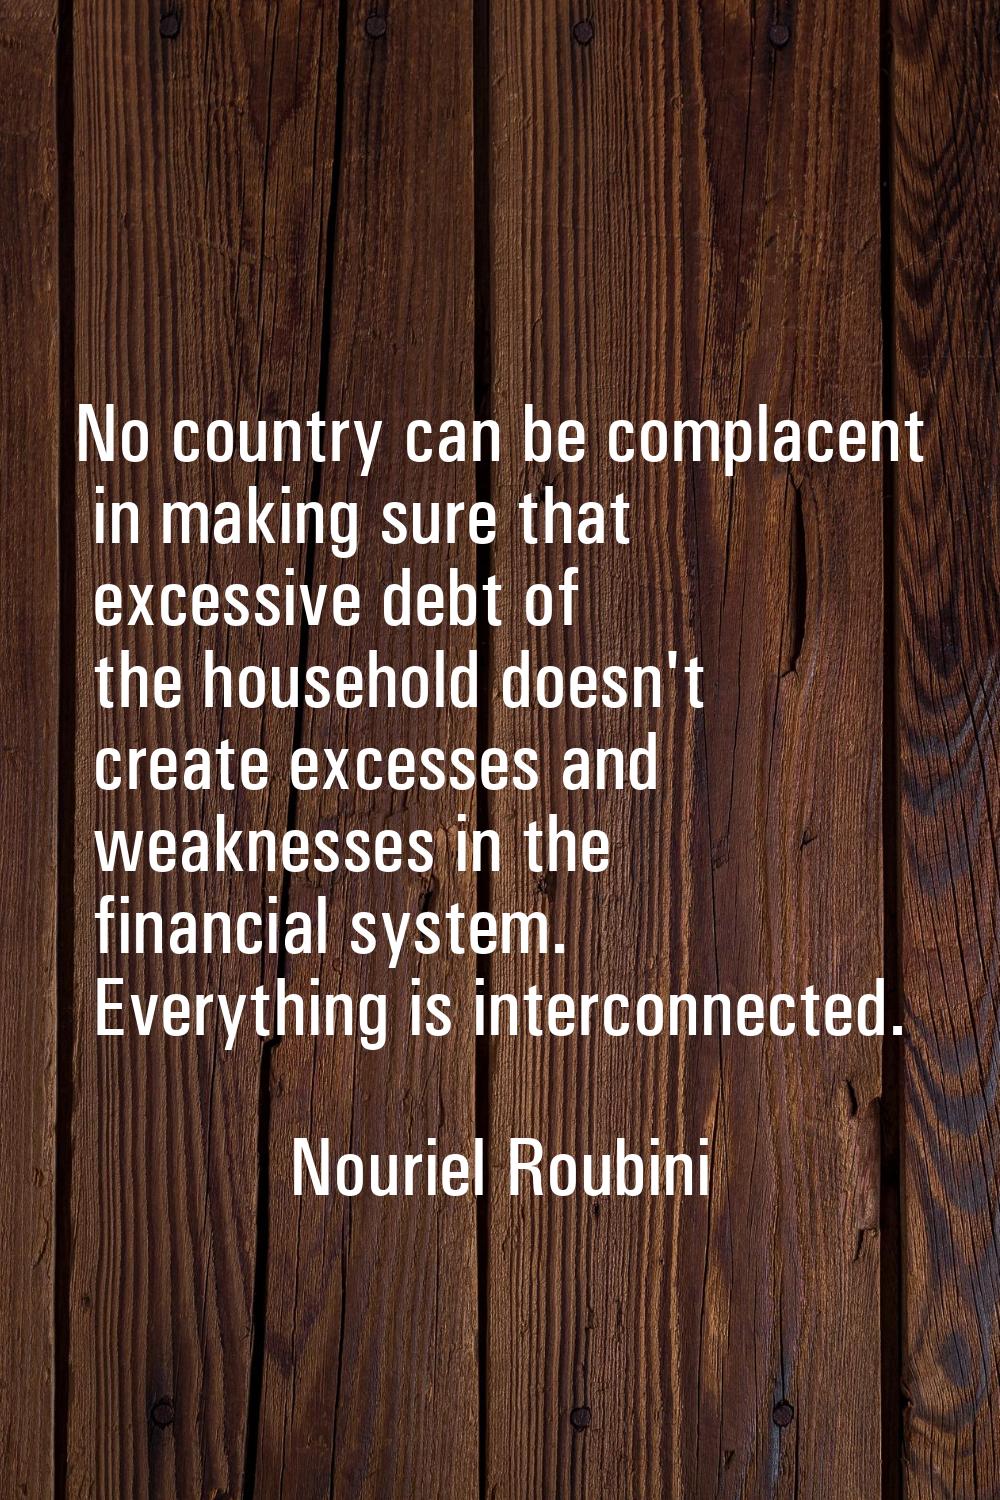 No country can be complacent in making sure that excessive debt of the household doesn't create exc